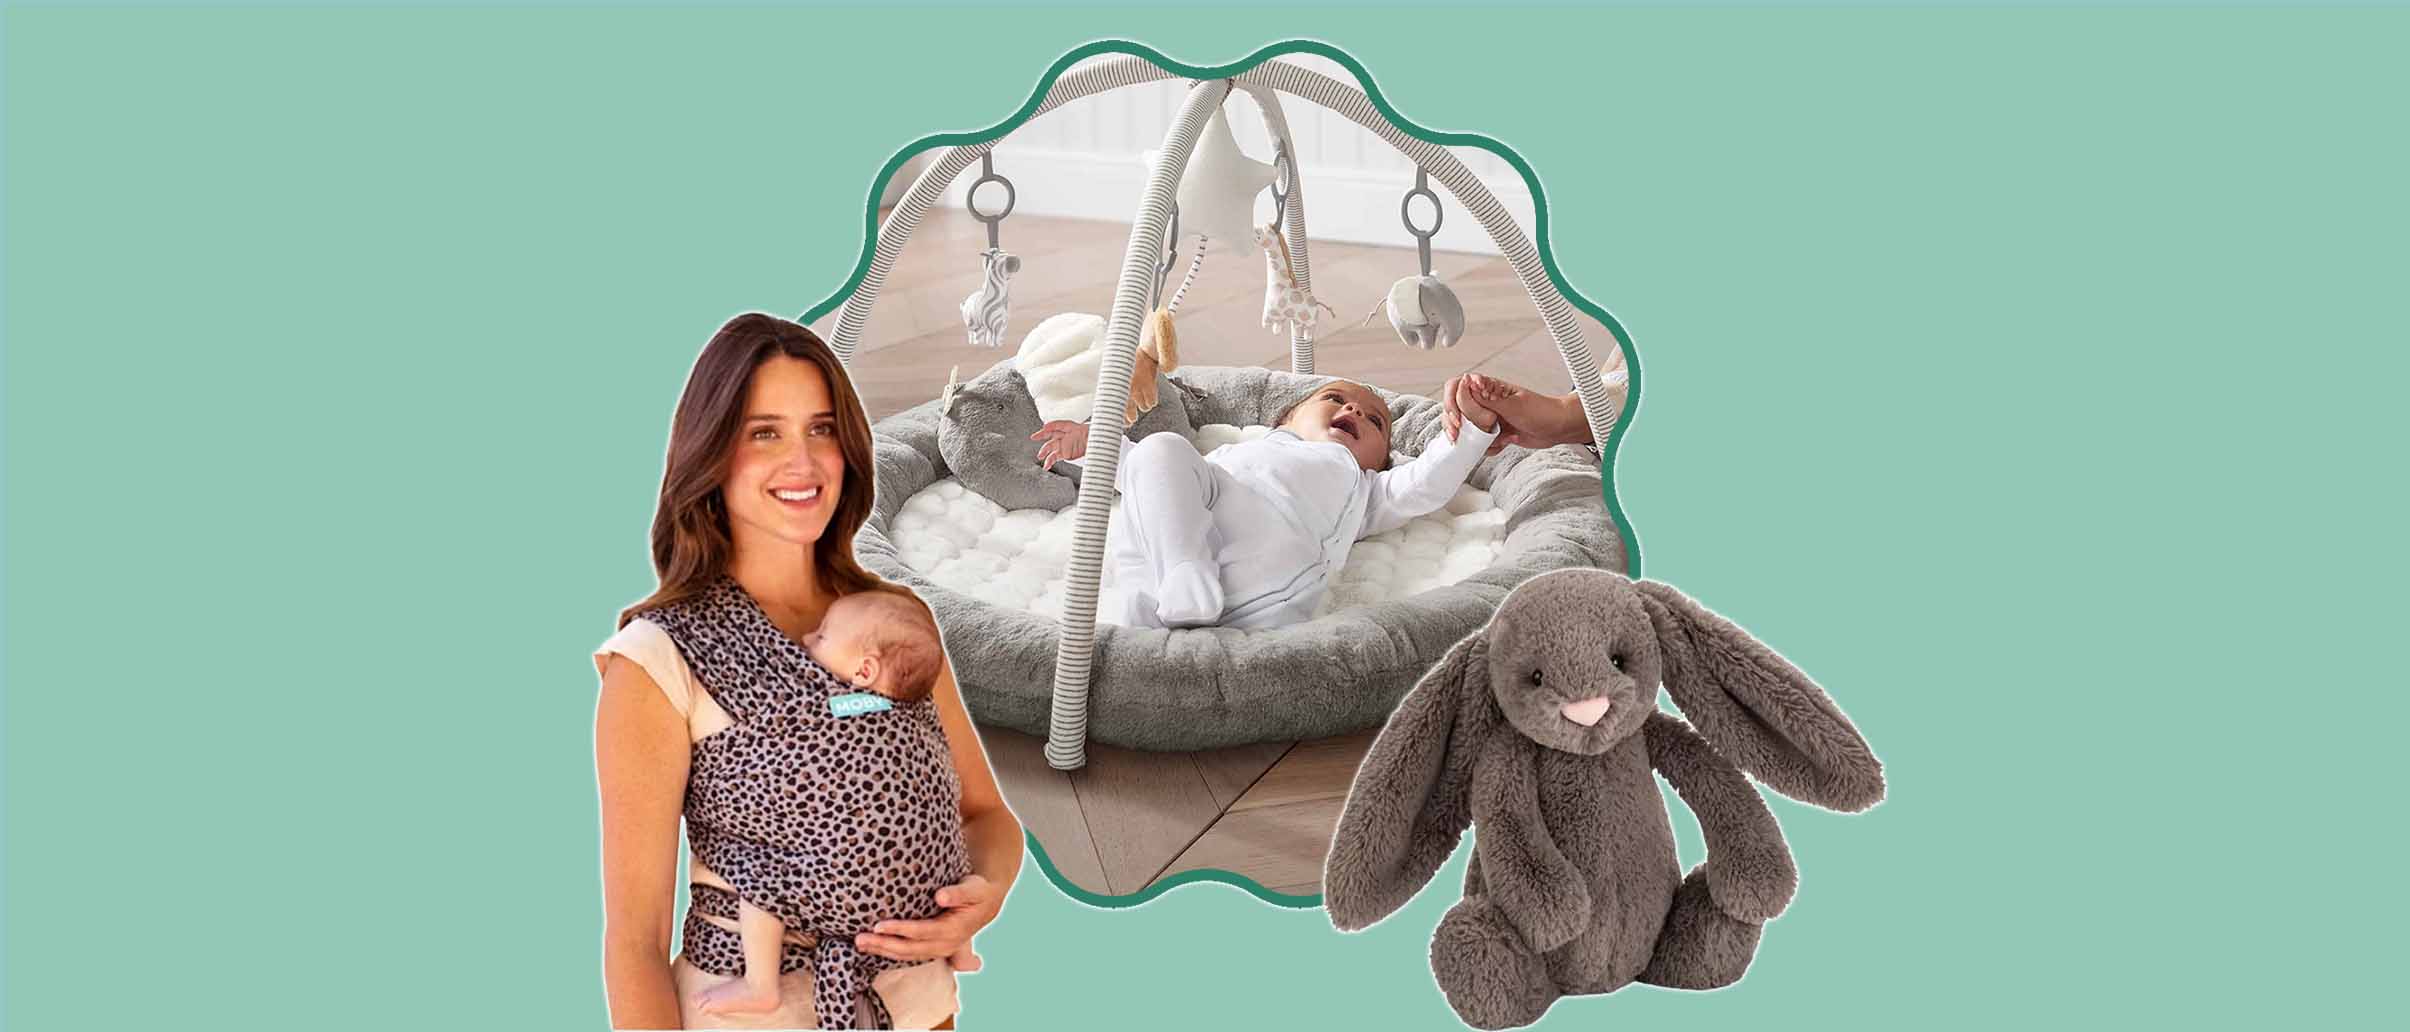 Your baby shower gift guide: Shop our winning round-up